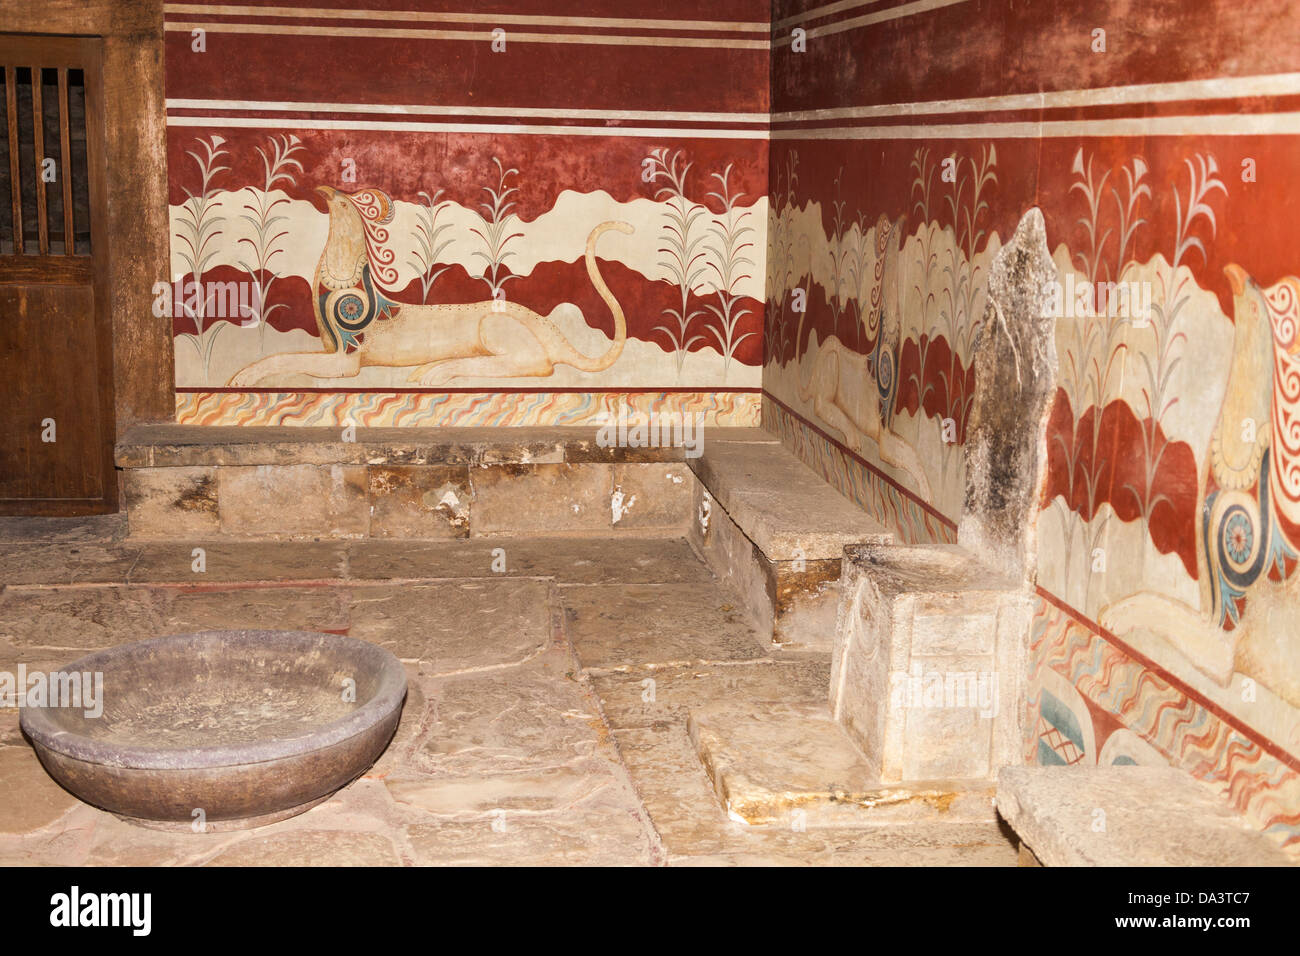 Wall frescoes of griffins and alabaster throne in the Throne room, Knossos Palace, Knossos, Crete, Greece Stock Photo